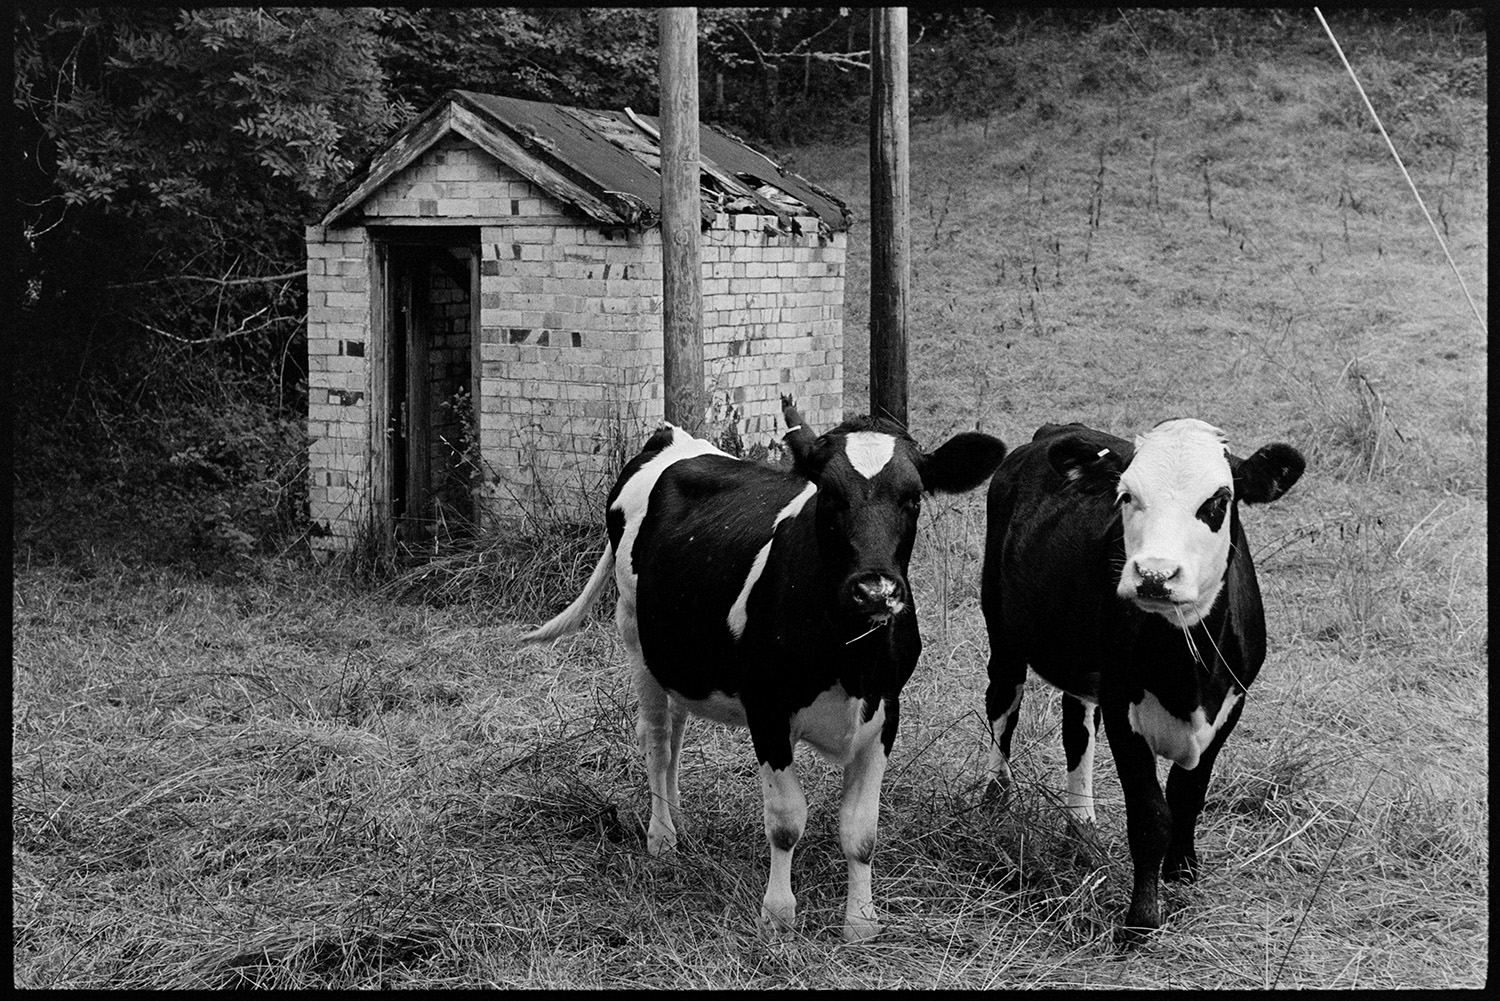 Cows in front of old engine house, for water pump. 
[Two cows stood in front of a pump house or engine house in a field at Halsdon Mill, Dolton. The roof of the pump house is collapsing.]